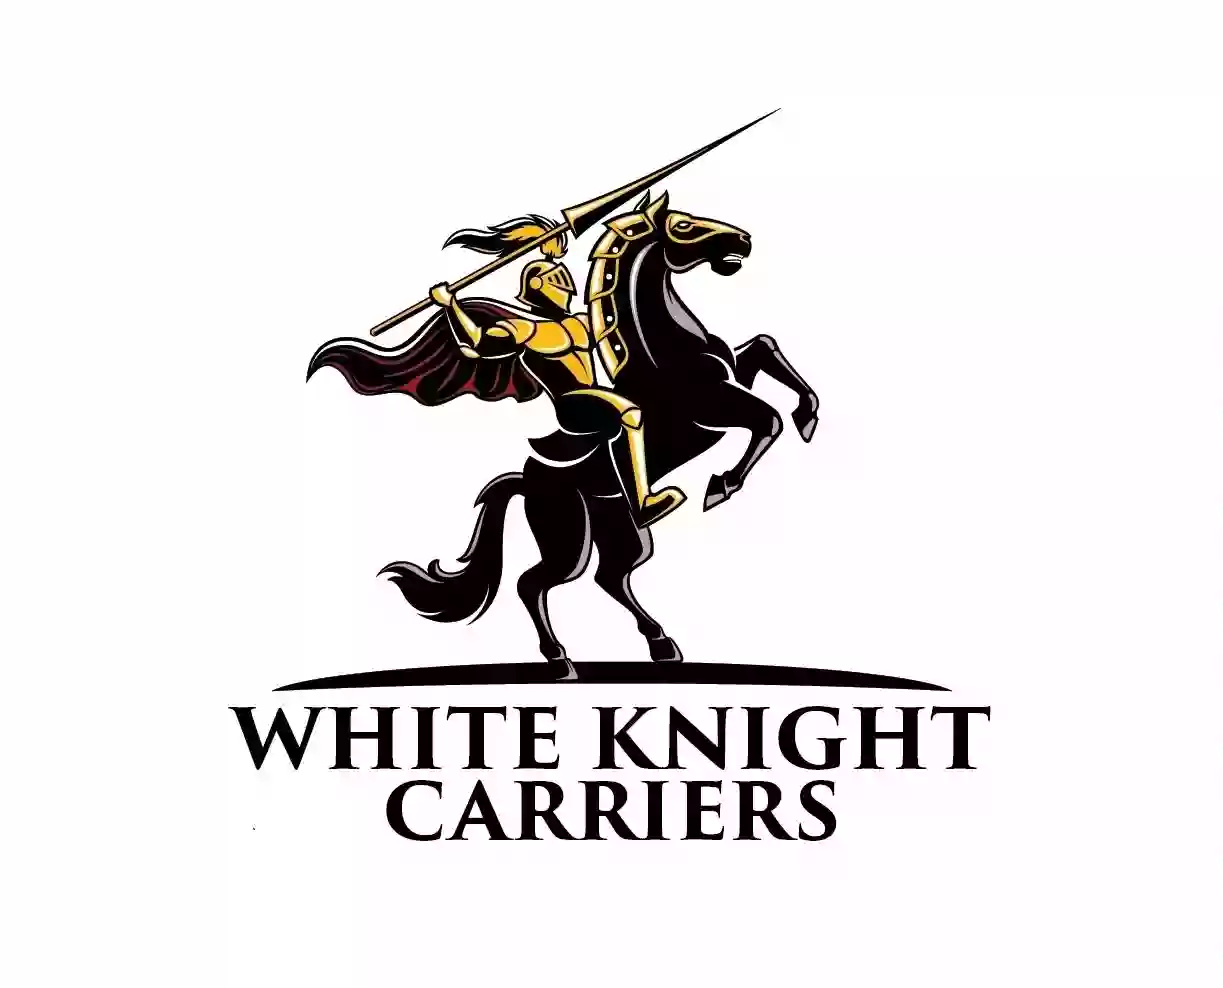 White Knight Carriers